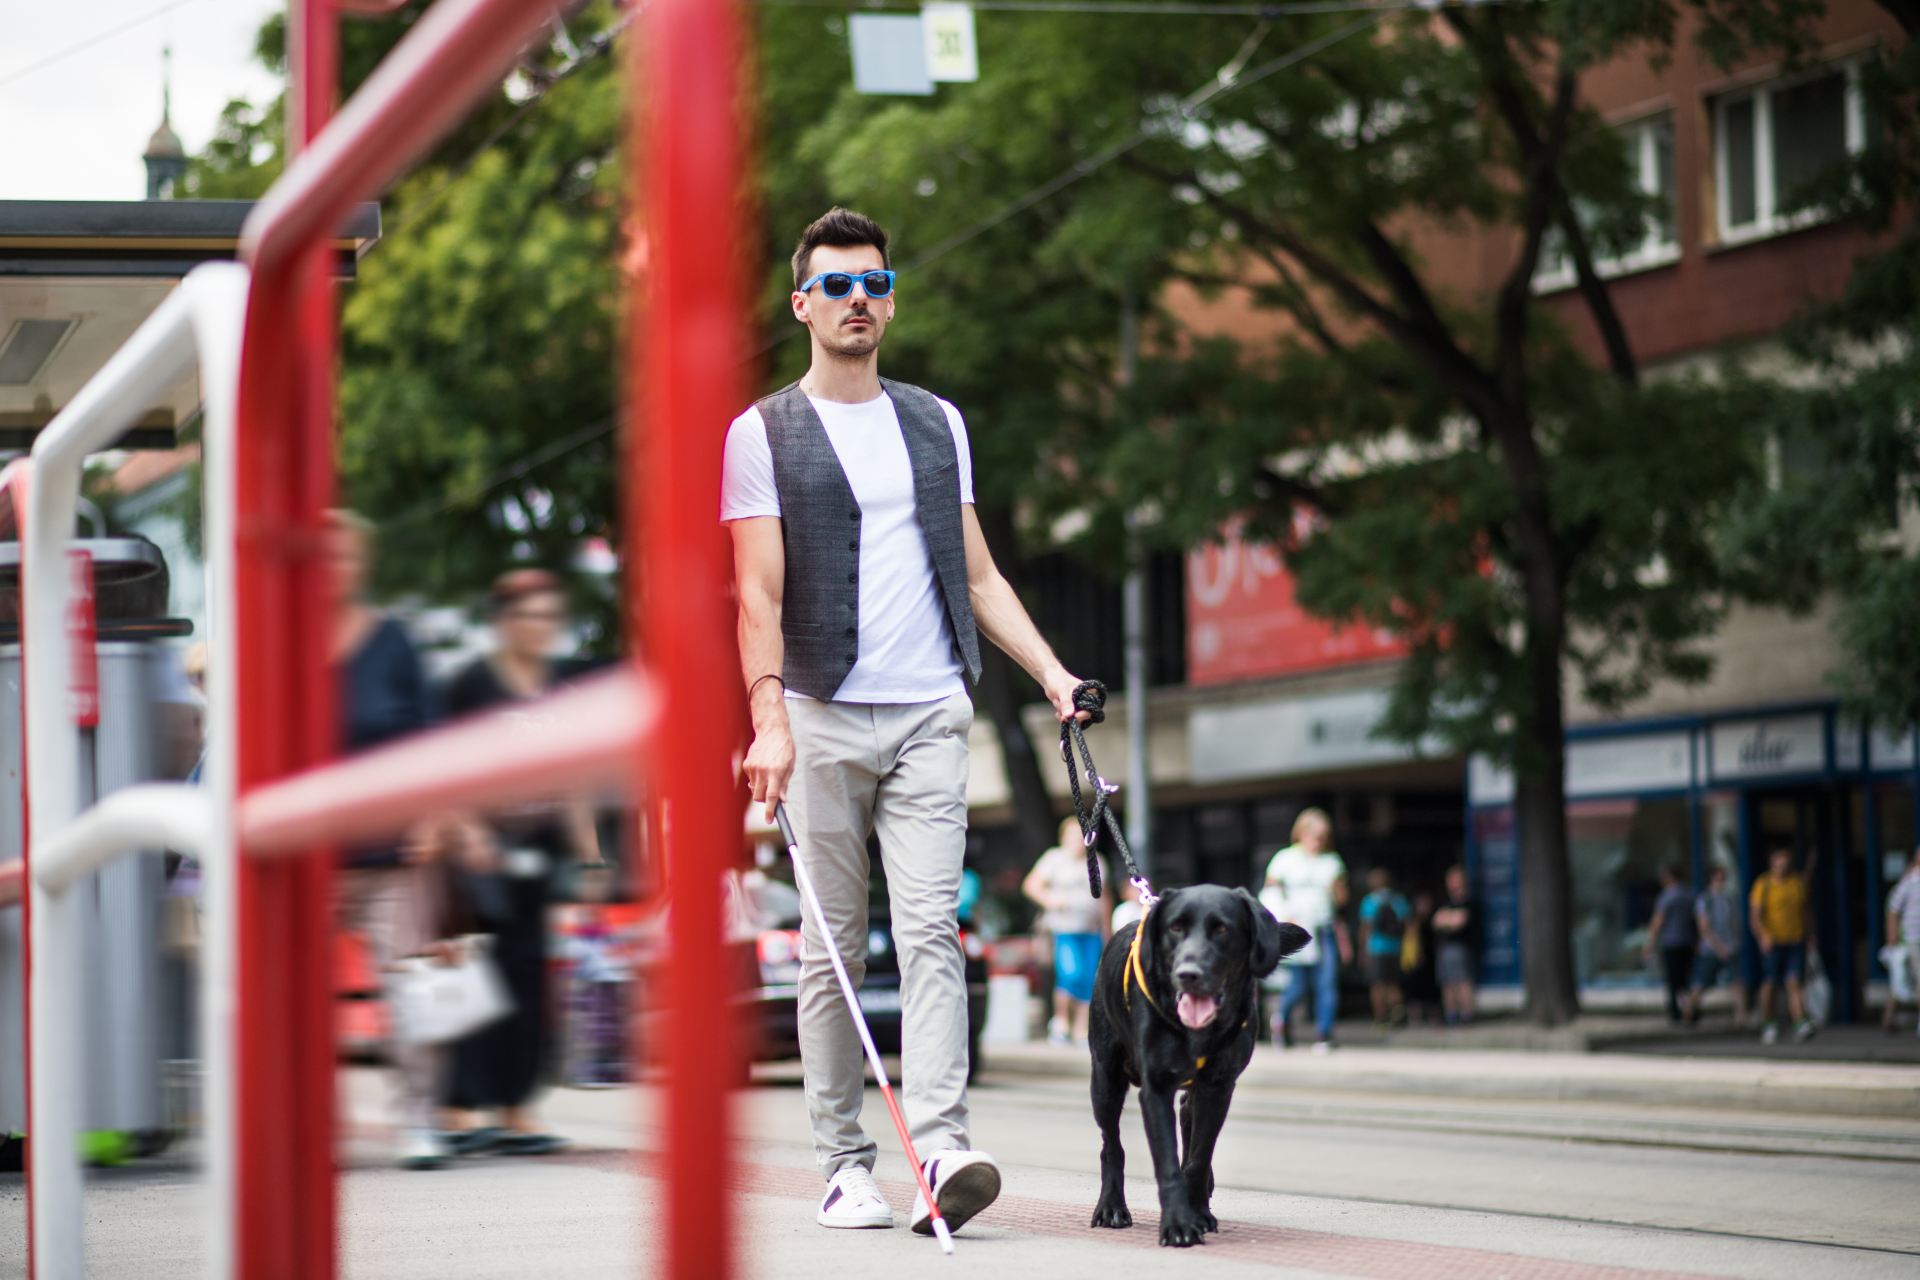 How can cities help visually impaired people?